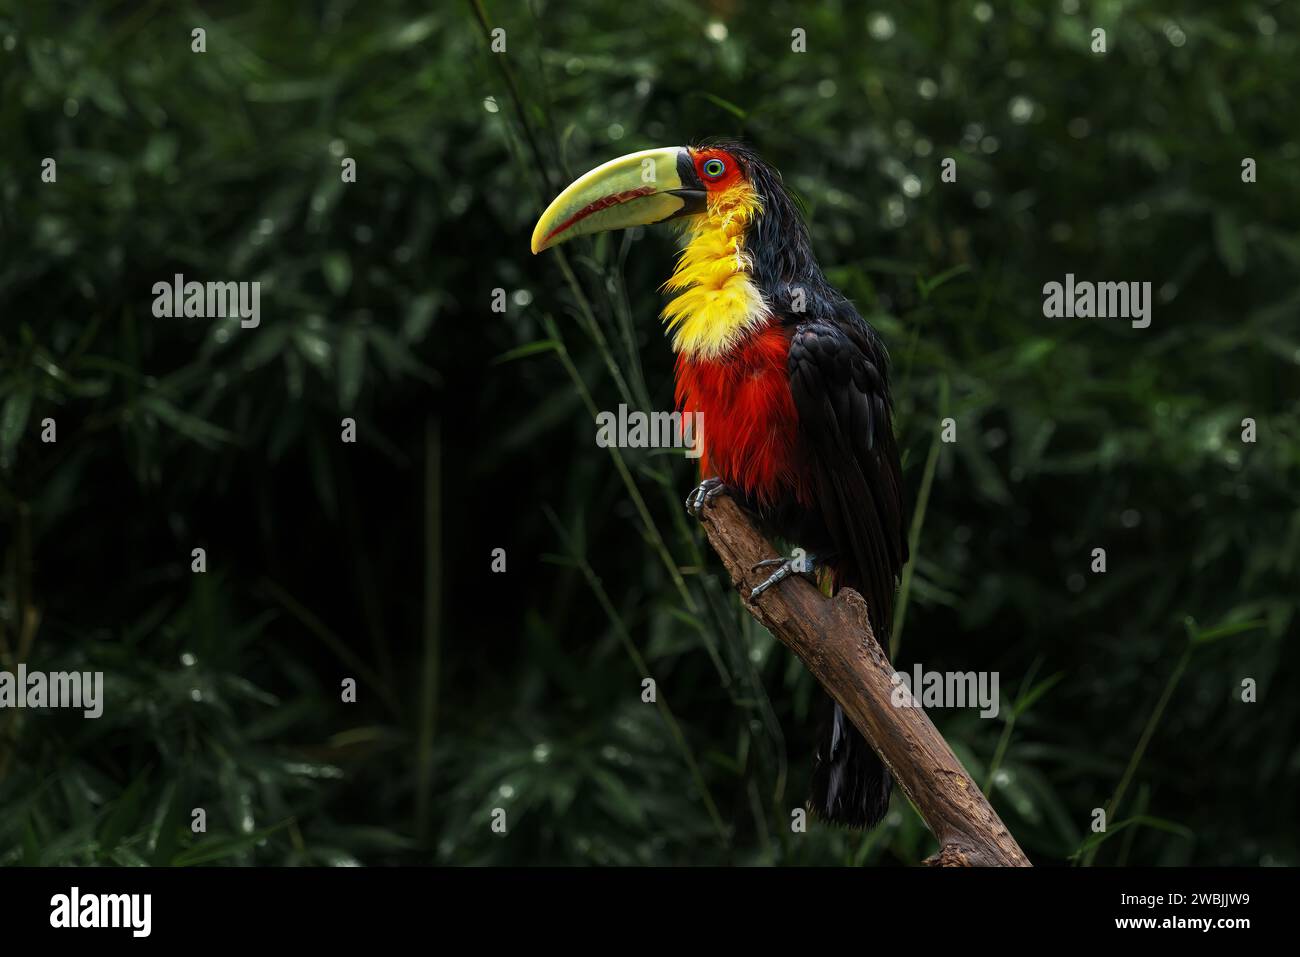 Soaking Wet Red-breasted toucan or Green-billed toucan (Ramphastos dicolorus) Stock Photo